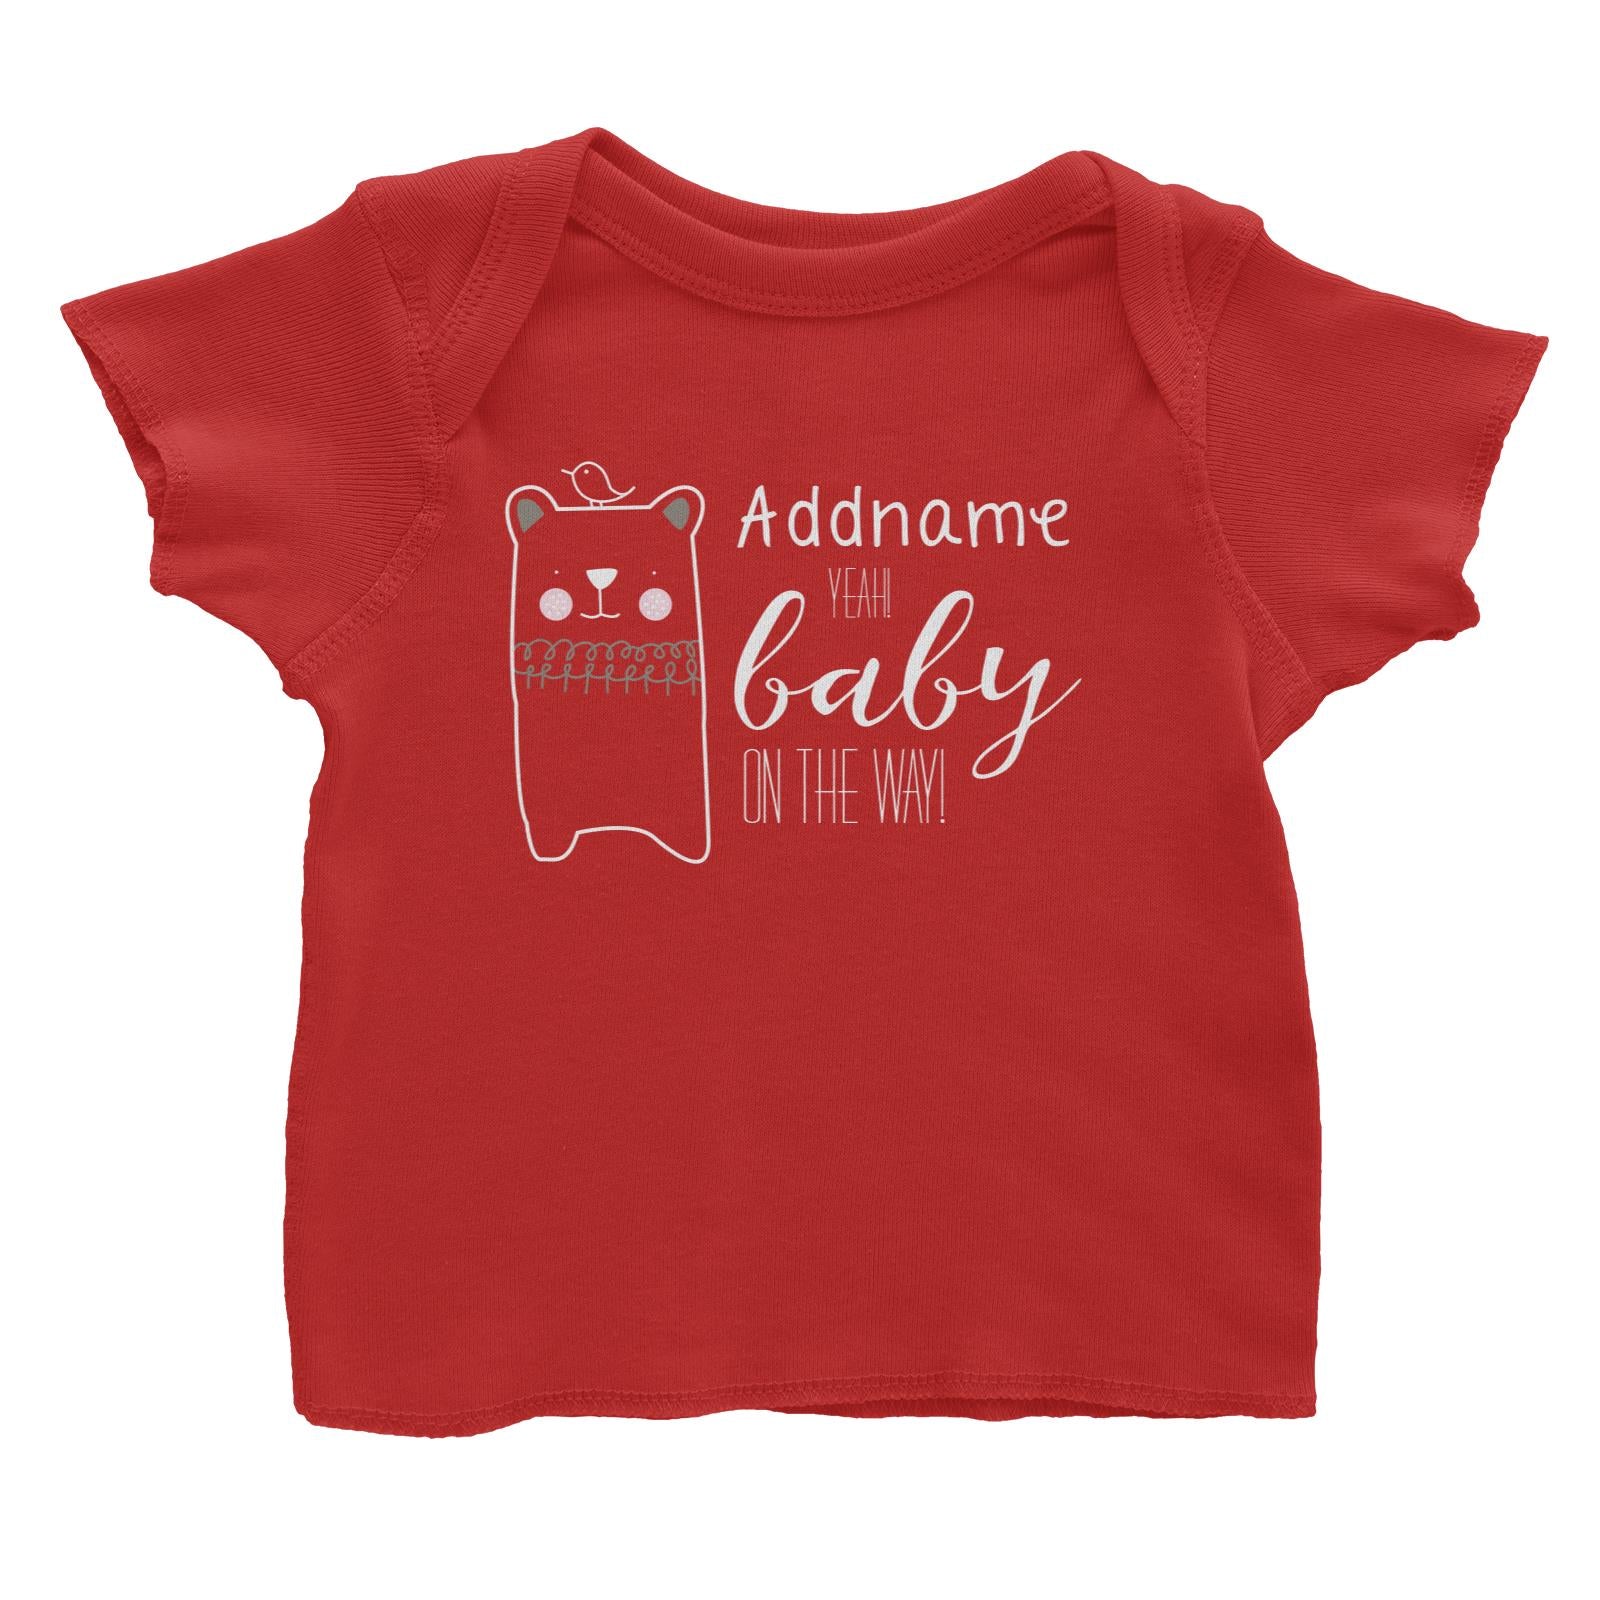 Cute Animals and Friends Series 2 Bear Addname Yeah Baby On the Way Baby T-Shirt